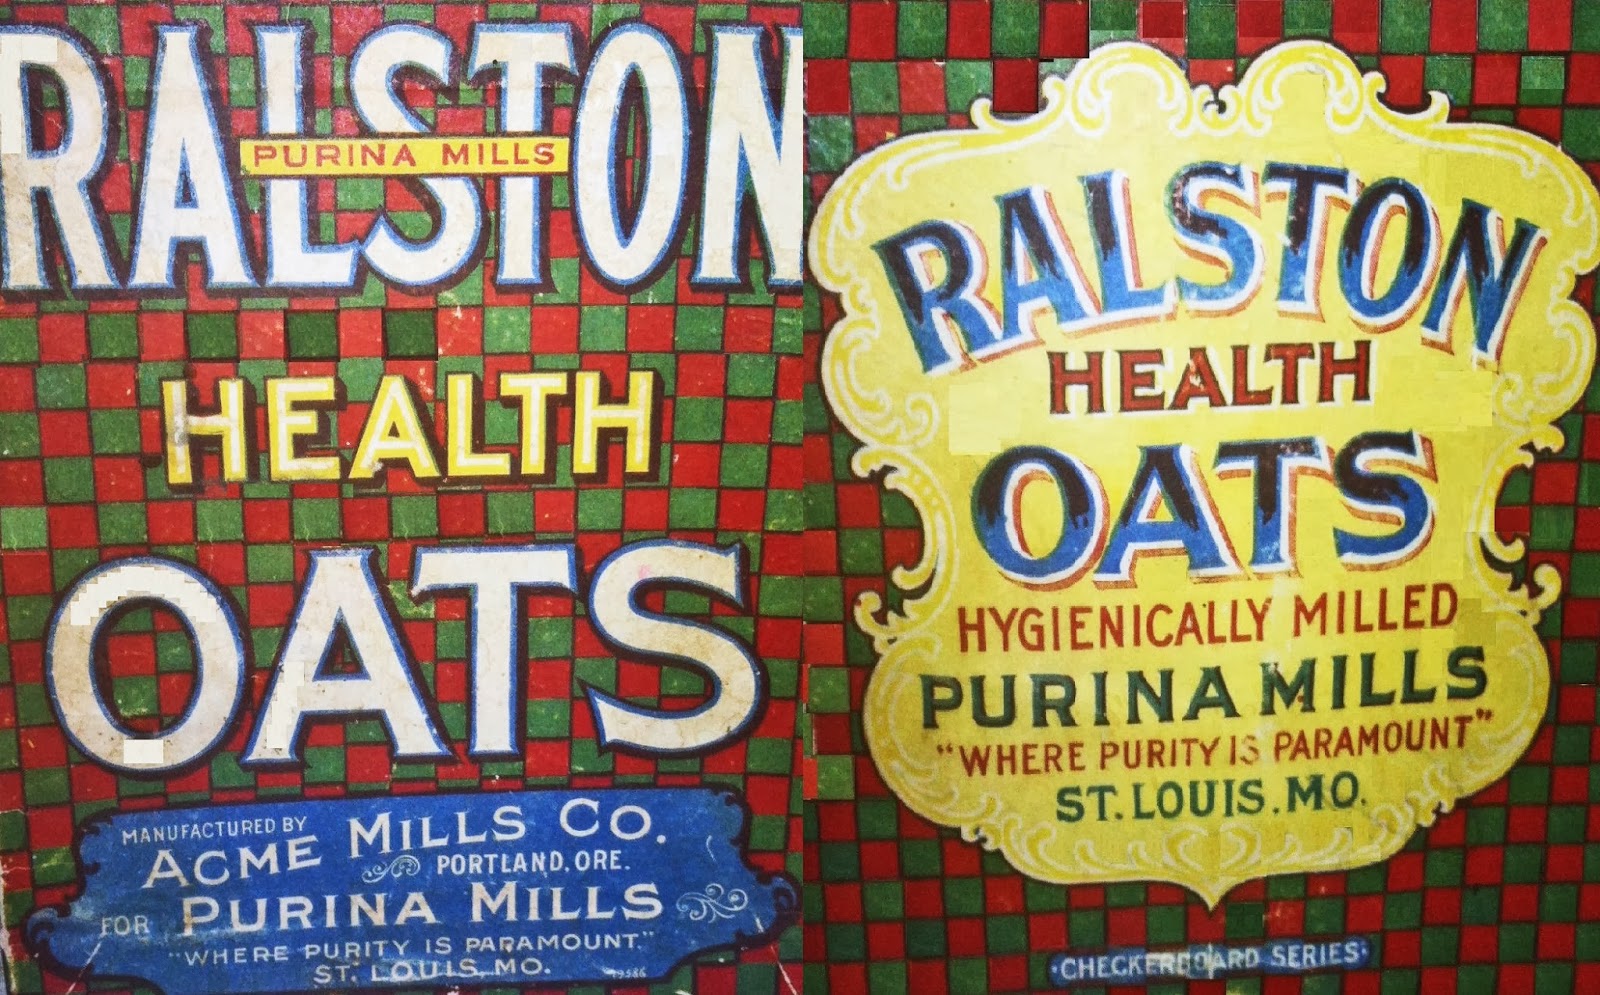 1991 Ralston Bill & Teds Excellent Cereal Box unused factory Flat bt1 